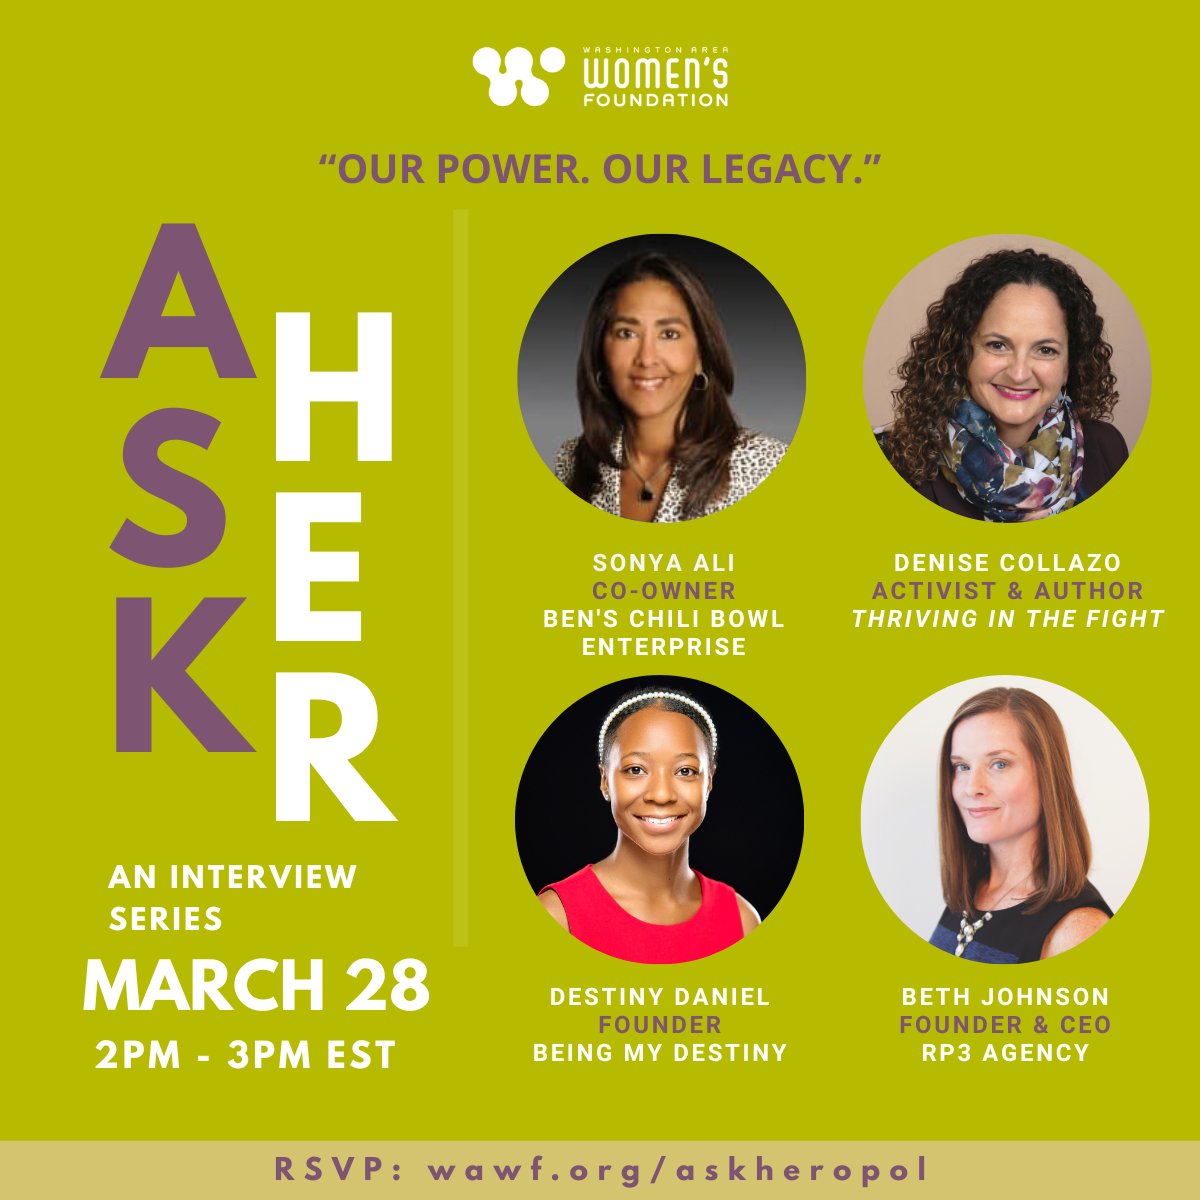 Save the date! Join @TheWomensFndtn on Thursday, March 28 for #AskHer: “Our Power. Our Legacy.” During this conversation, Sonya Ali and fellow panelists will uncover the unique challenges facing women business owners & celebrate their impact on our communities.